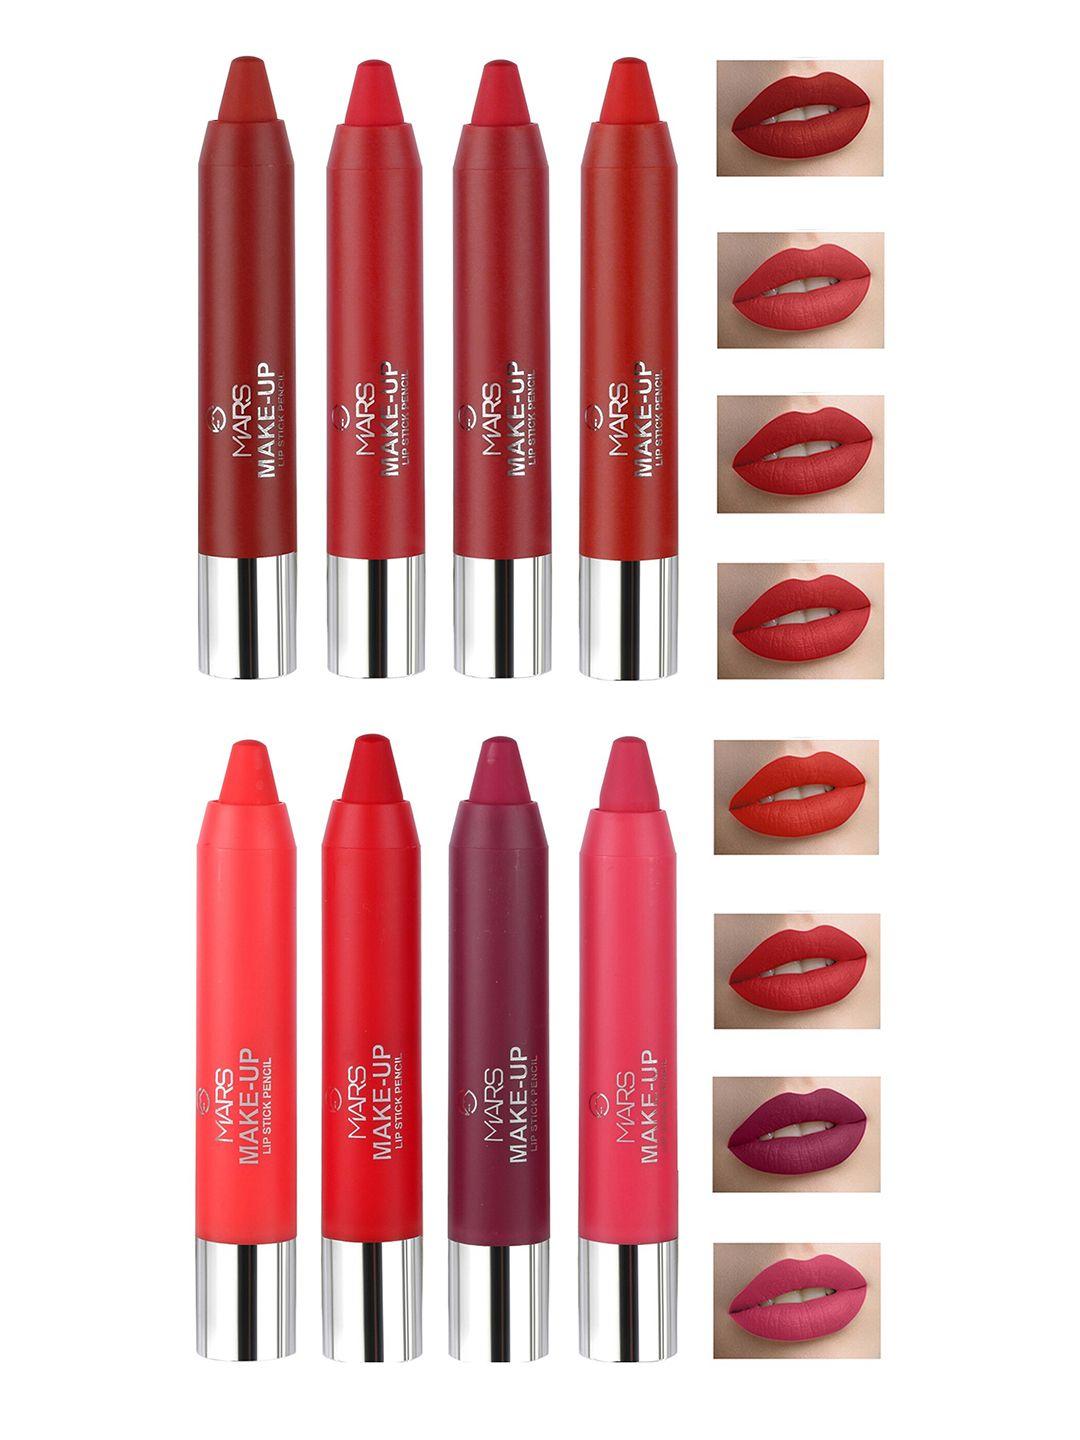 mars makeup set of 8 smooth and pigmented pencil lipstick - 3.6gm each